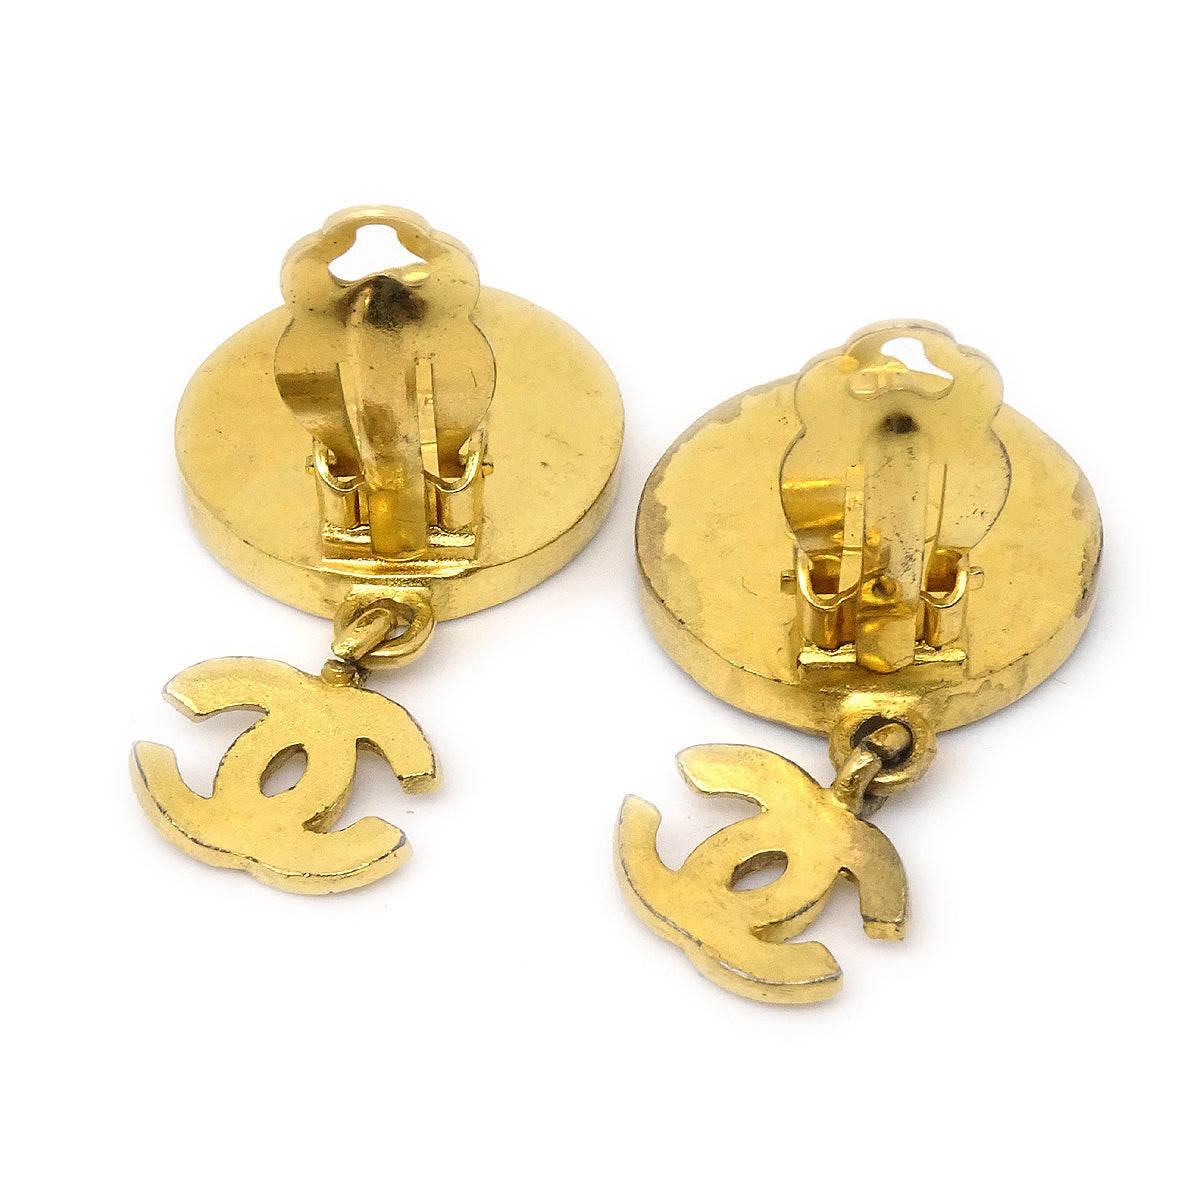 Chanel Earrings Clip-On Pearl Gold 95A